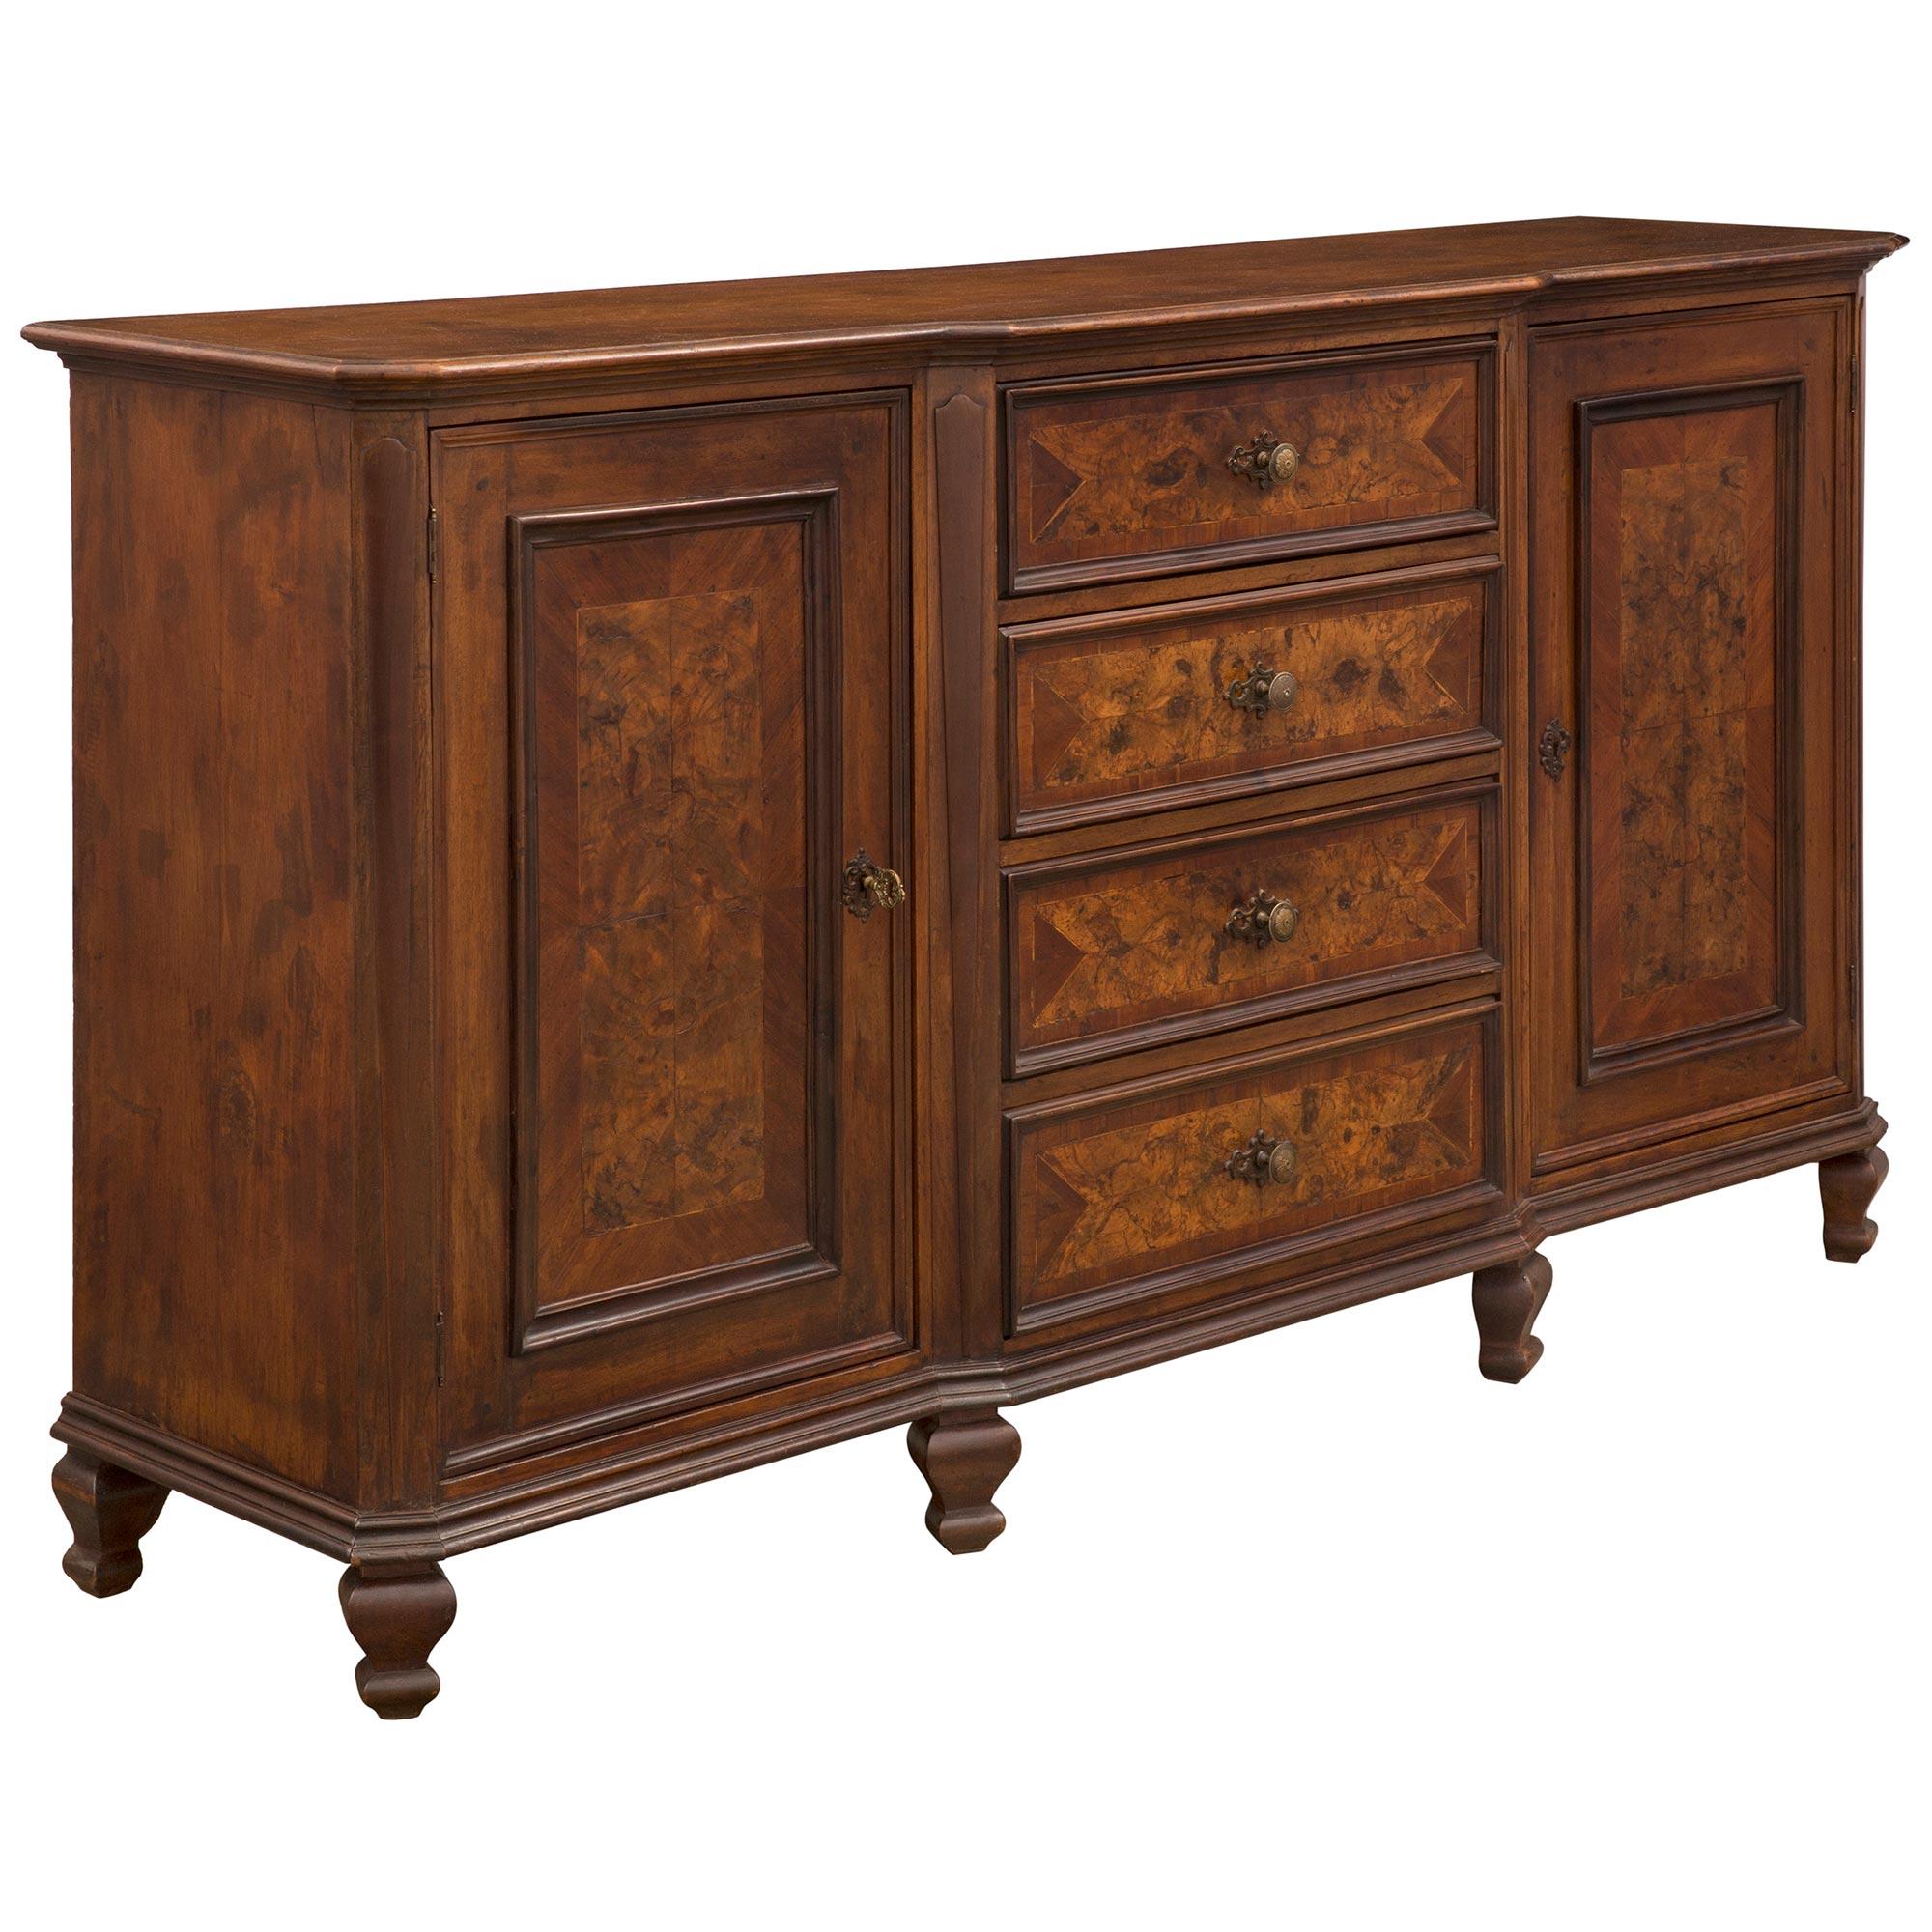 Italian Early 19th Century Walnut And Burl Walnut Buffet In Good Condition For Sale In West Palm Beach, FL